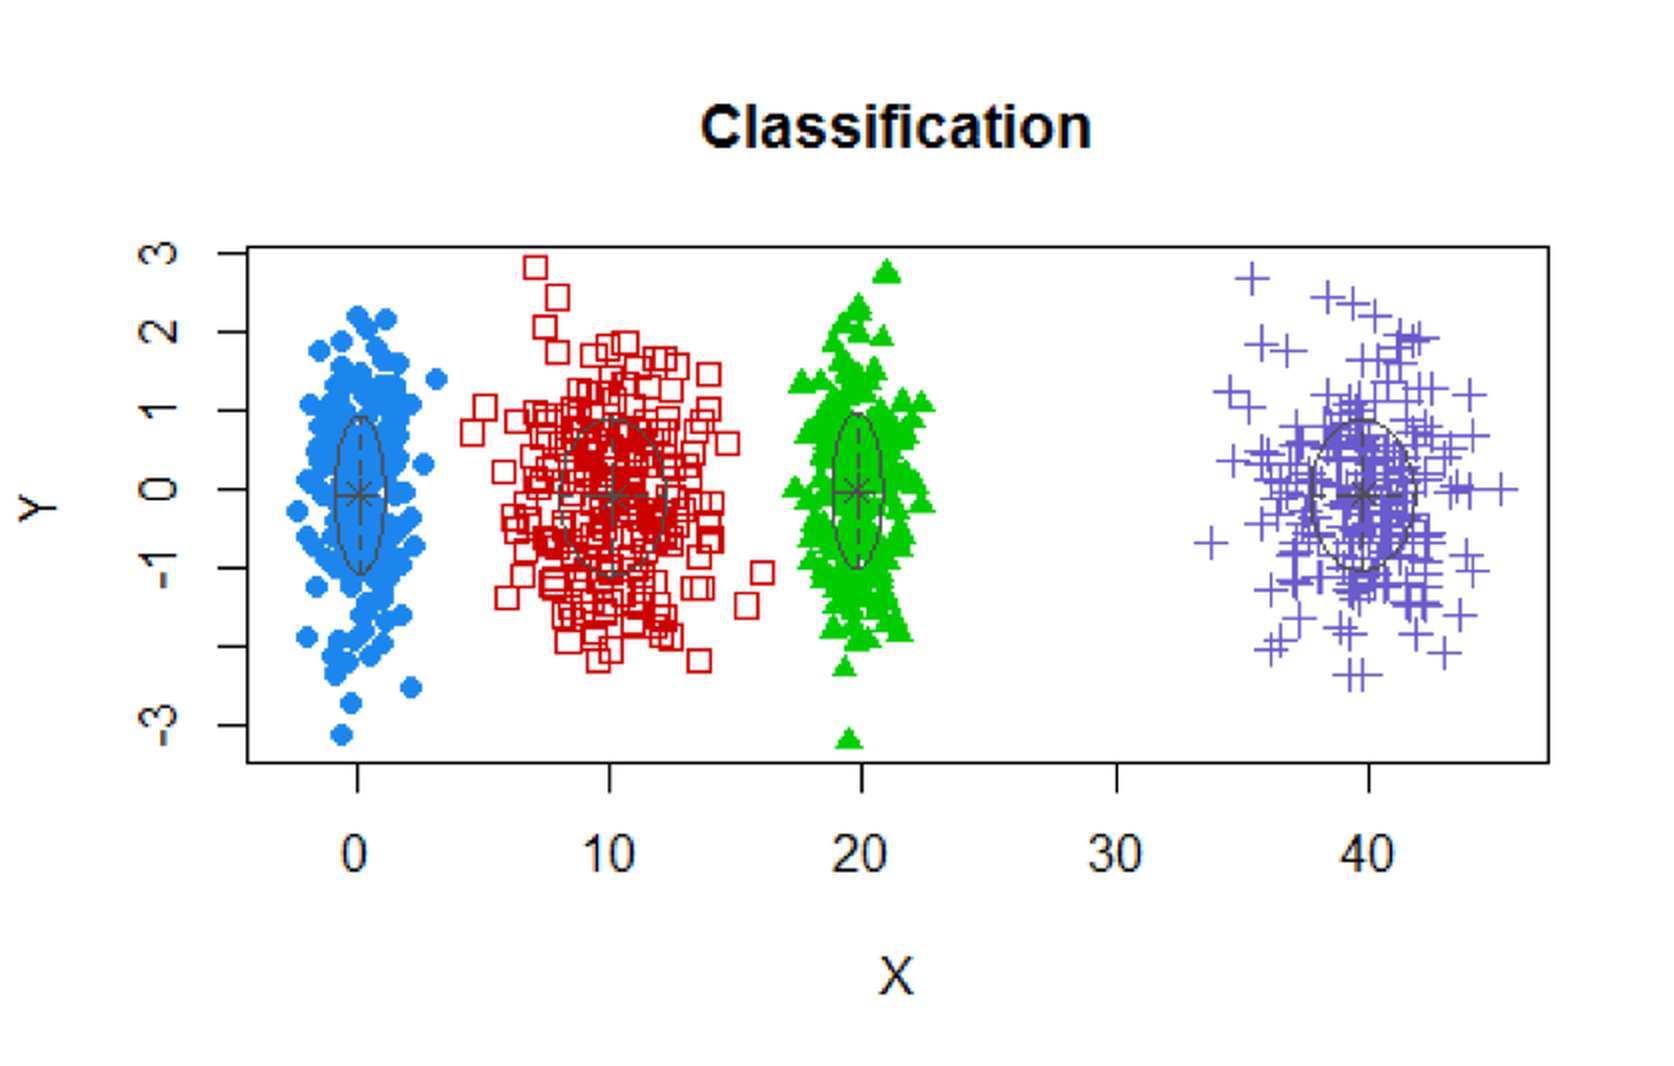 Clustering results of the simulated data